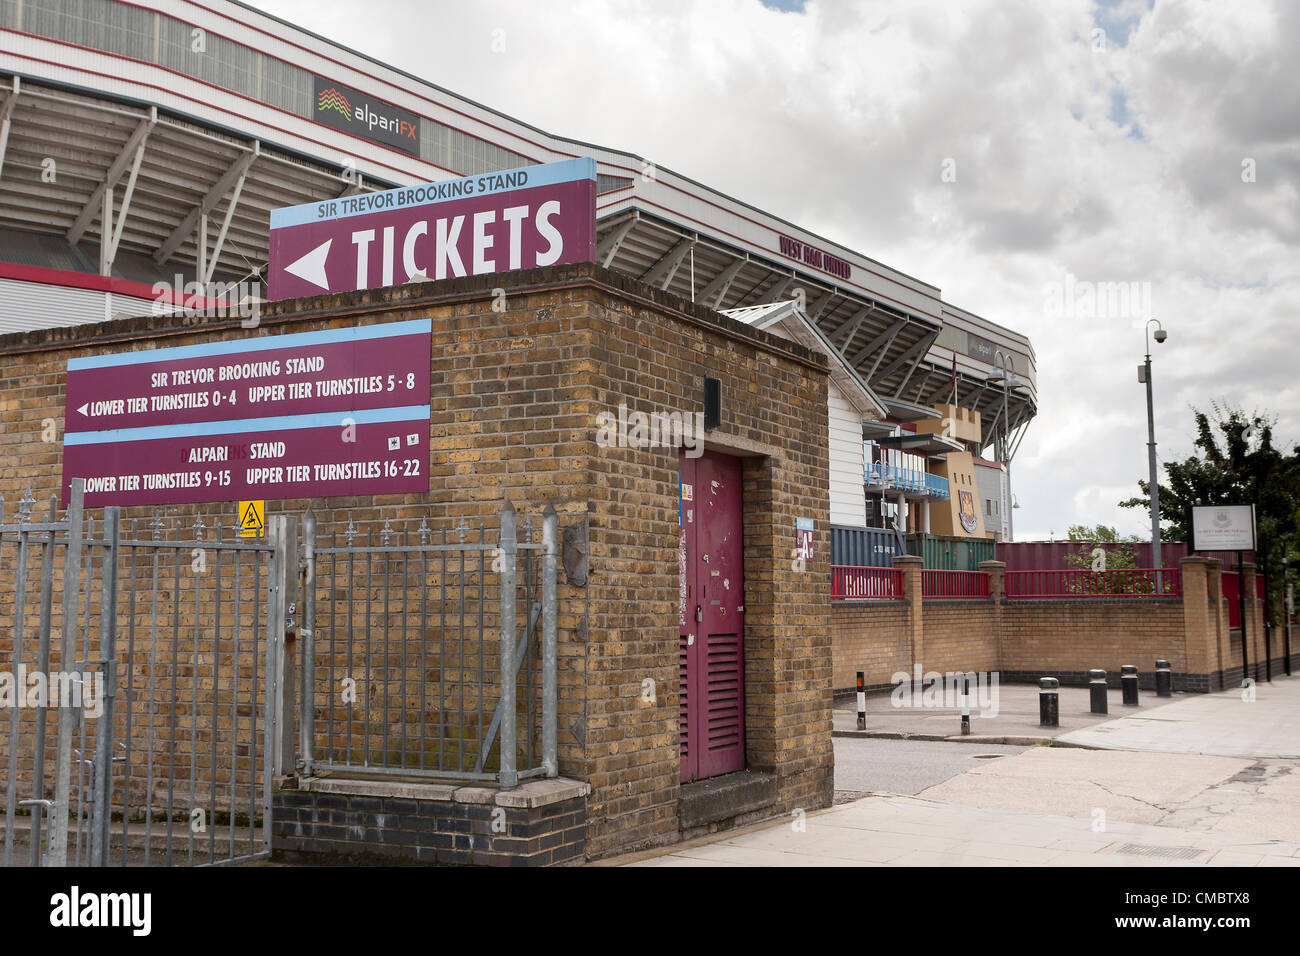 Sign for the ticket office of West Ham United Football Club, Upton Park, London. Also known as the Boleyn Ground. Stadium in background. Stock Photo